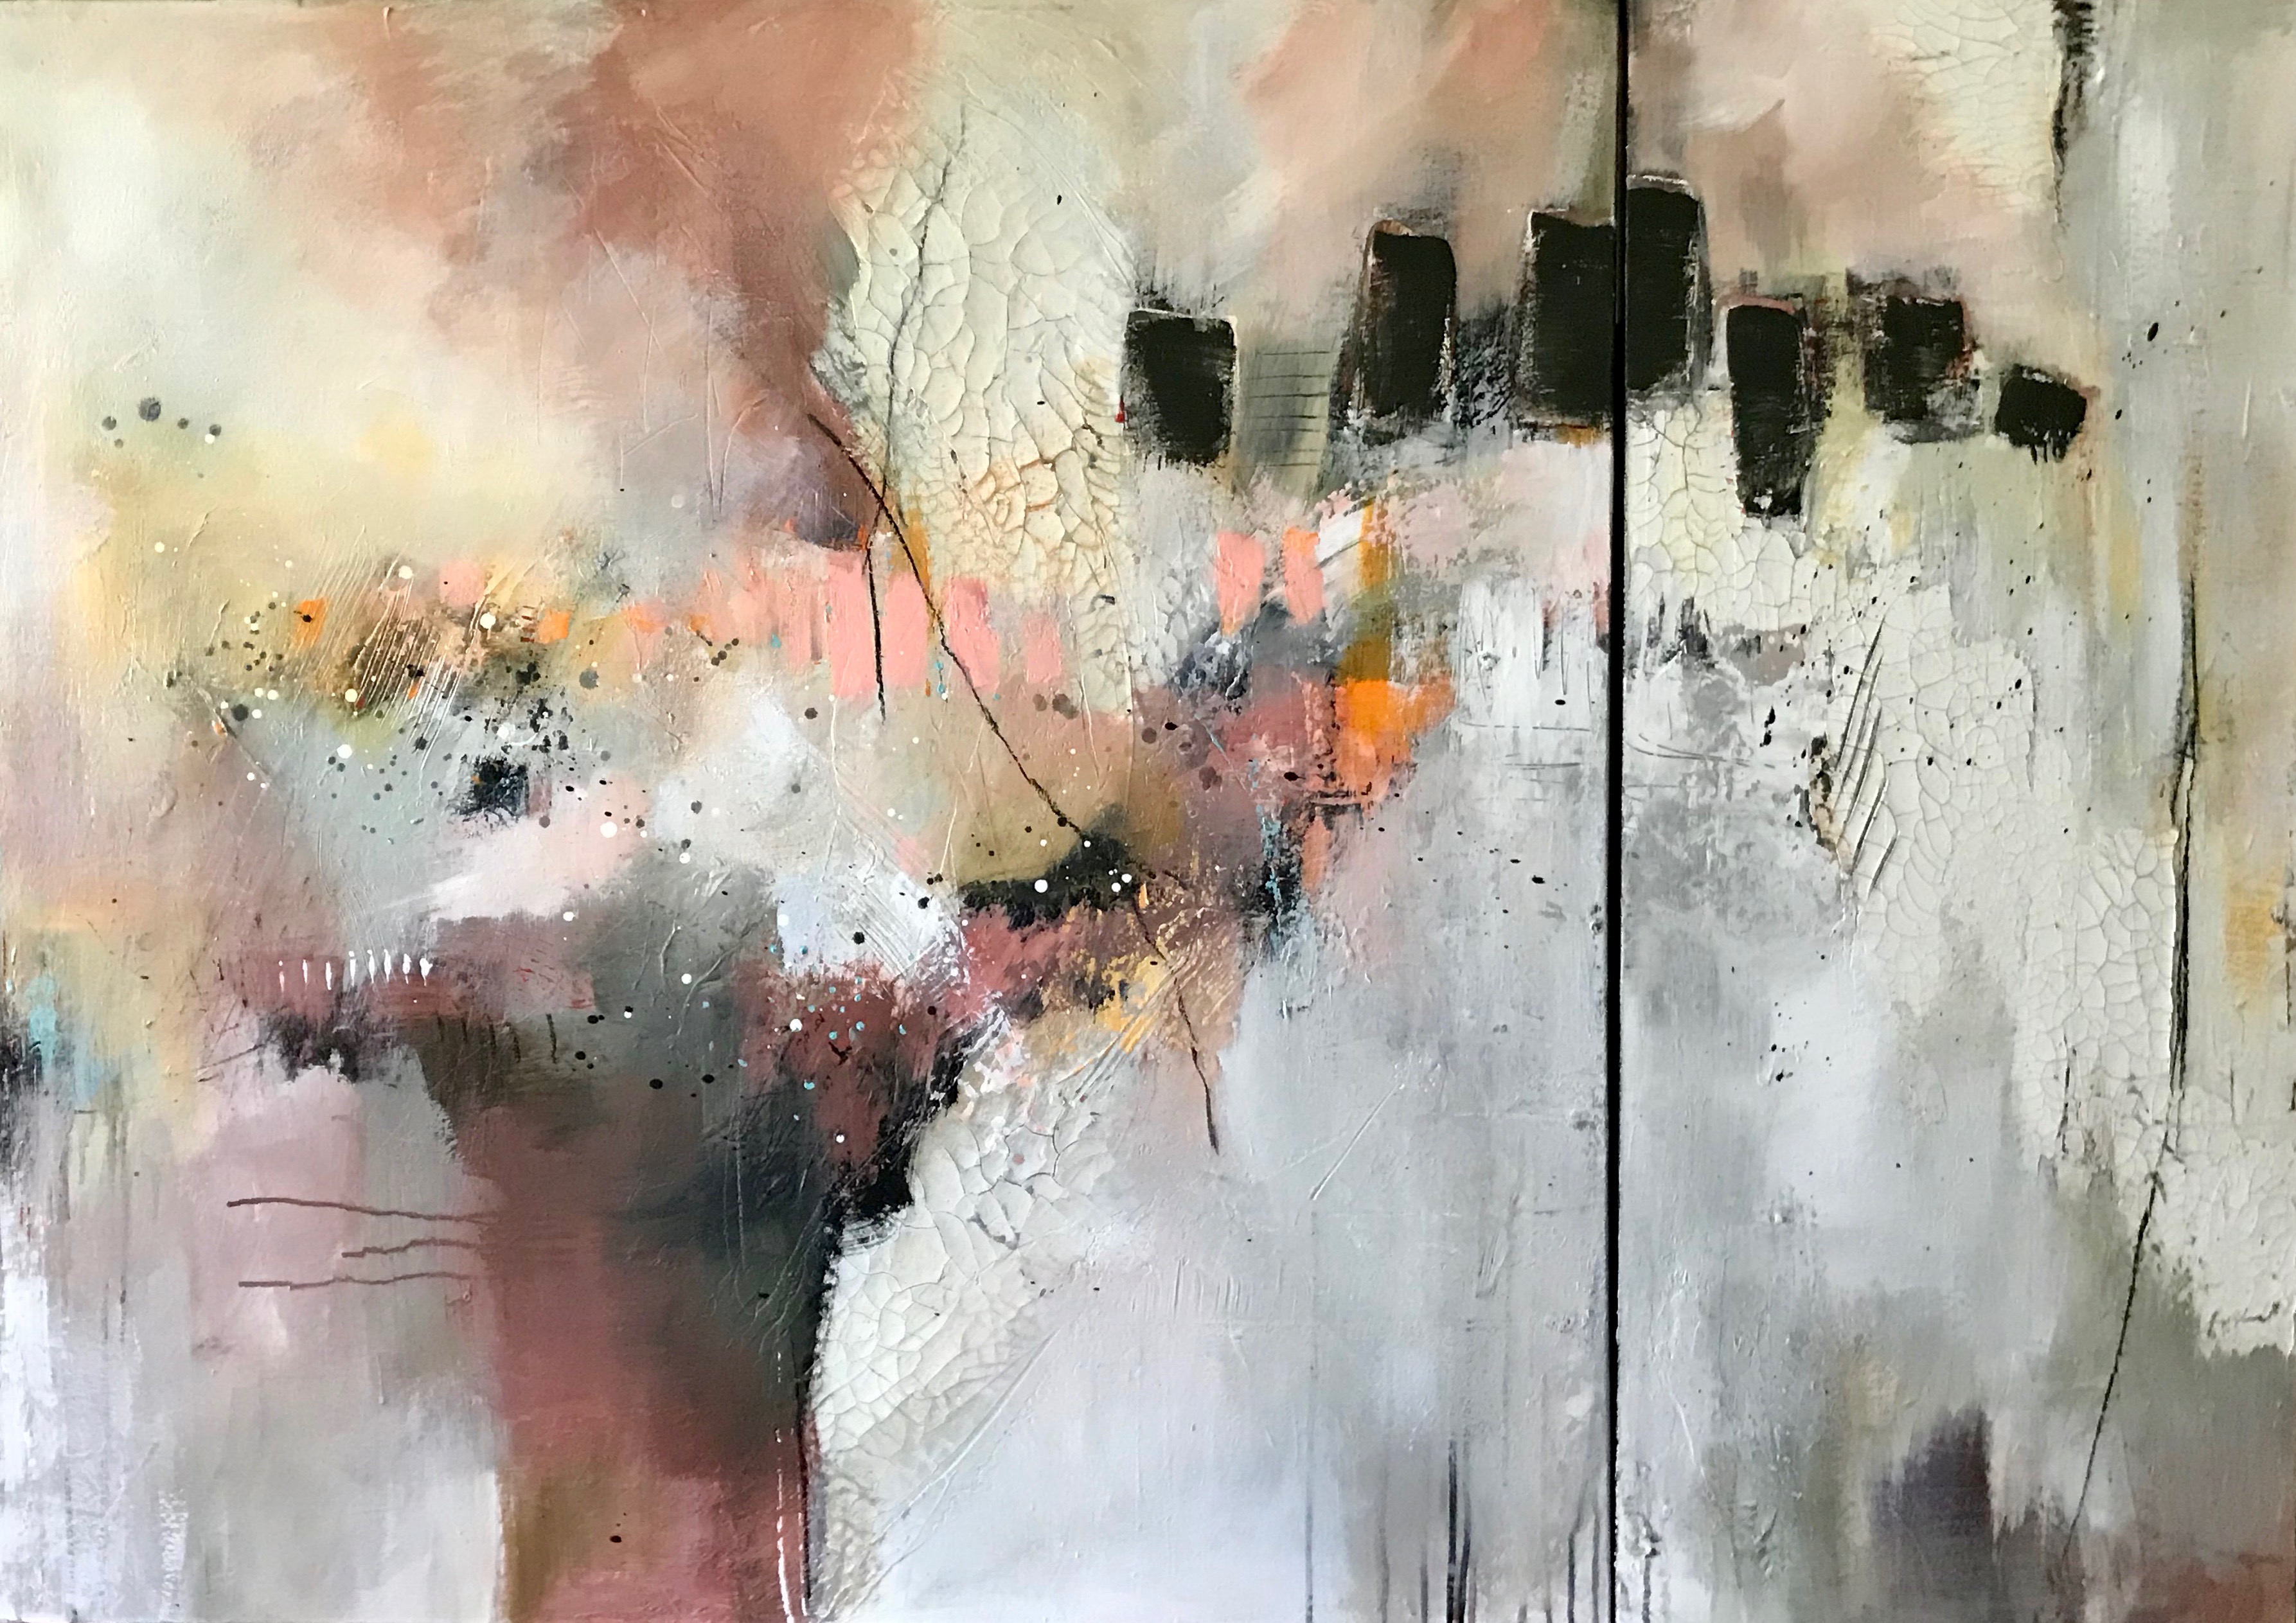 'My Offering' 40x40 and 16x40 in  contemporary modern abstract textured painting by Cher Devereaux on stretched canvas.